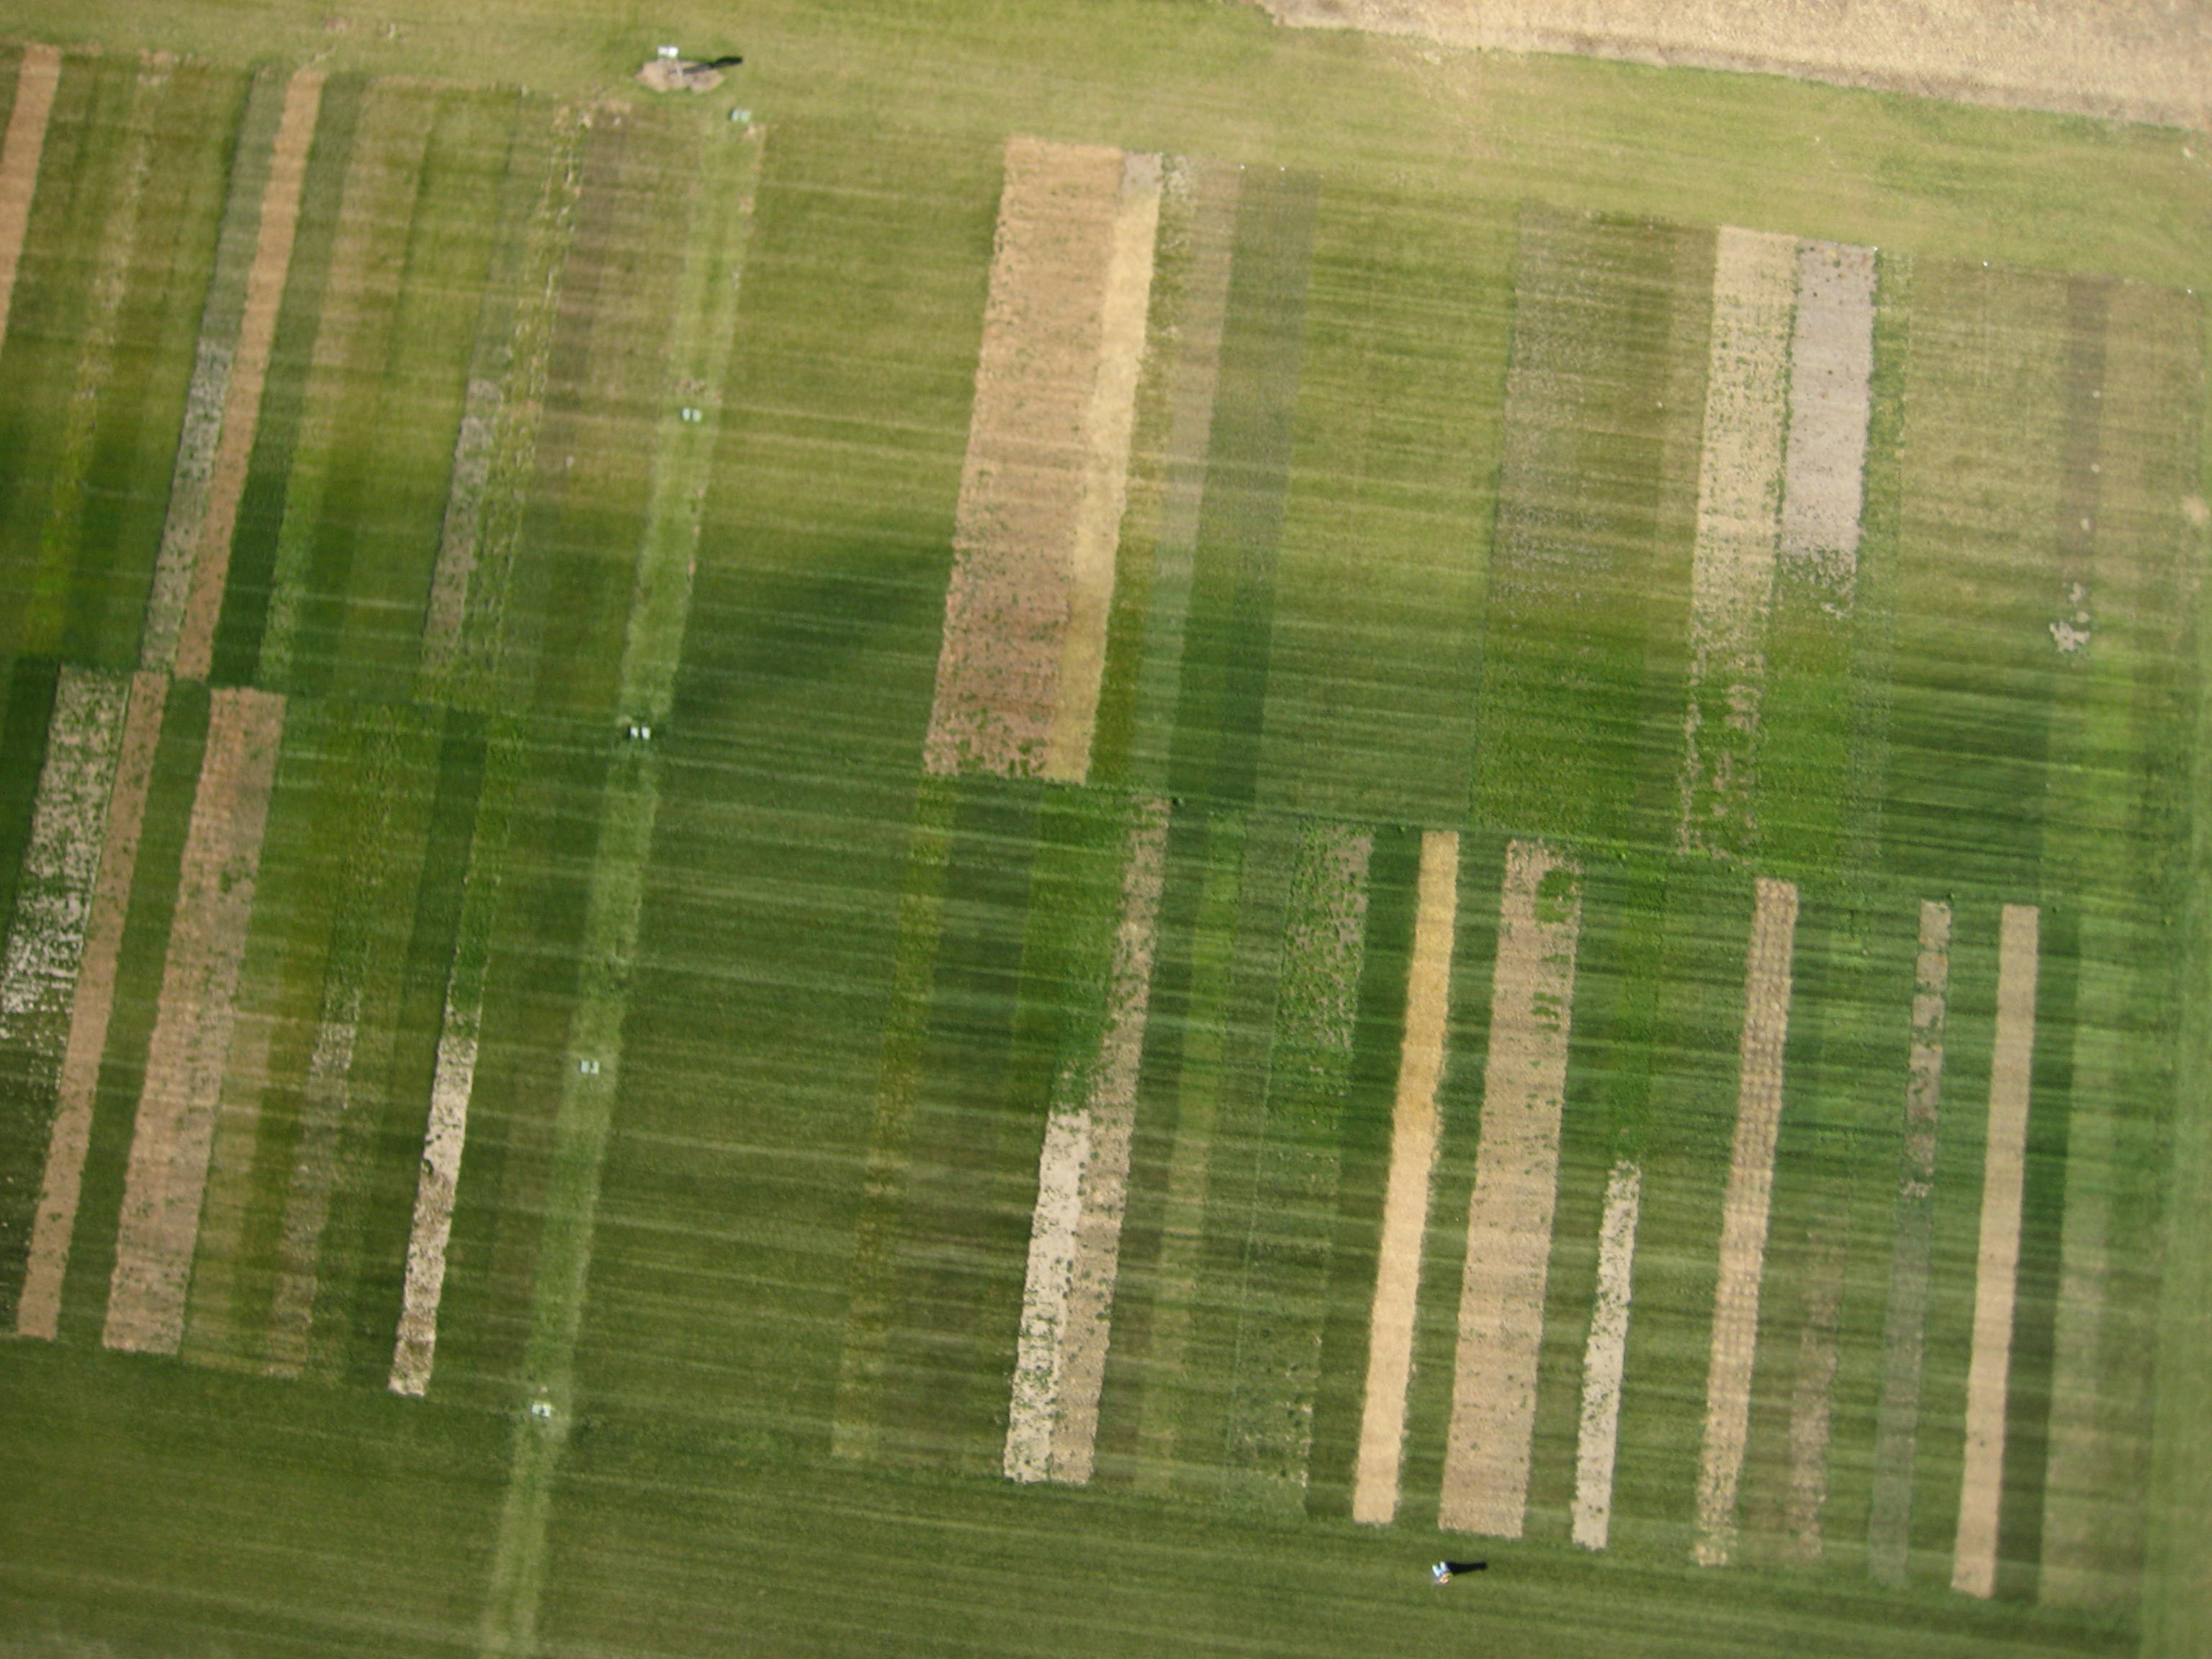 A robotic helicopter provides aerial images of fields that help scientists conduct crops research.